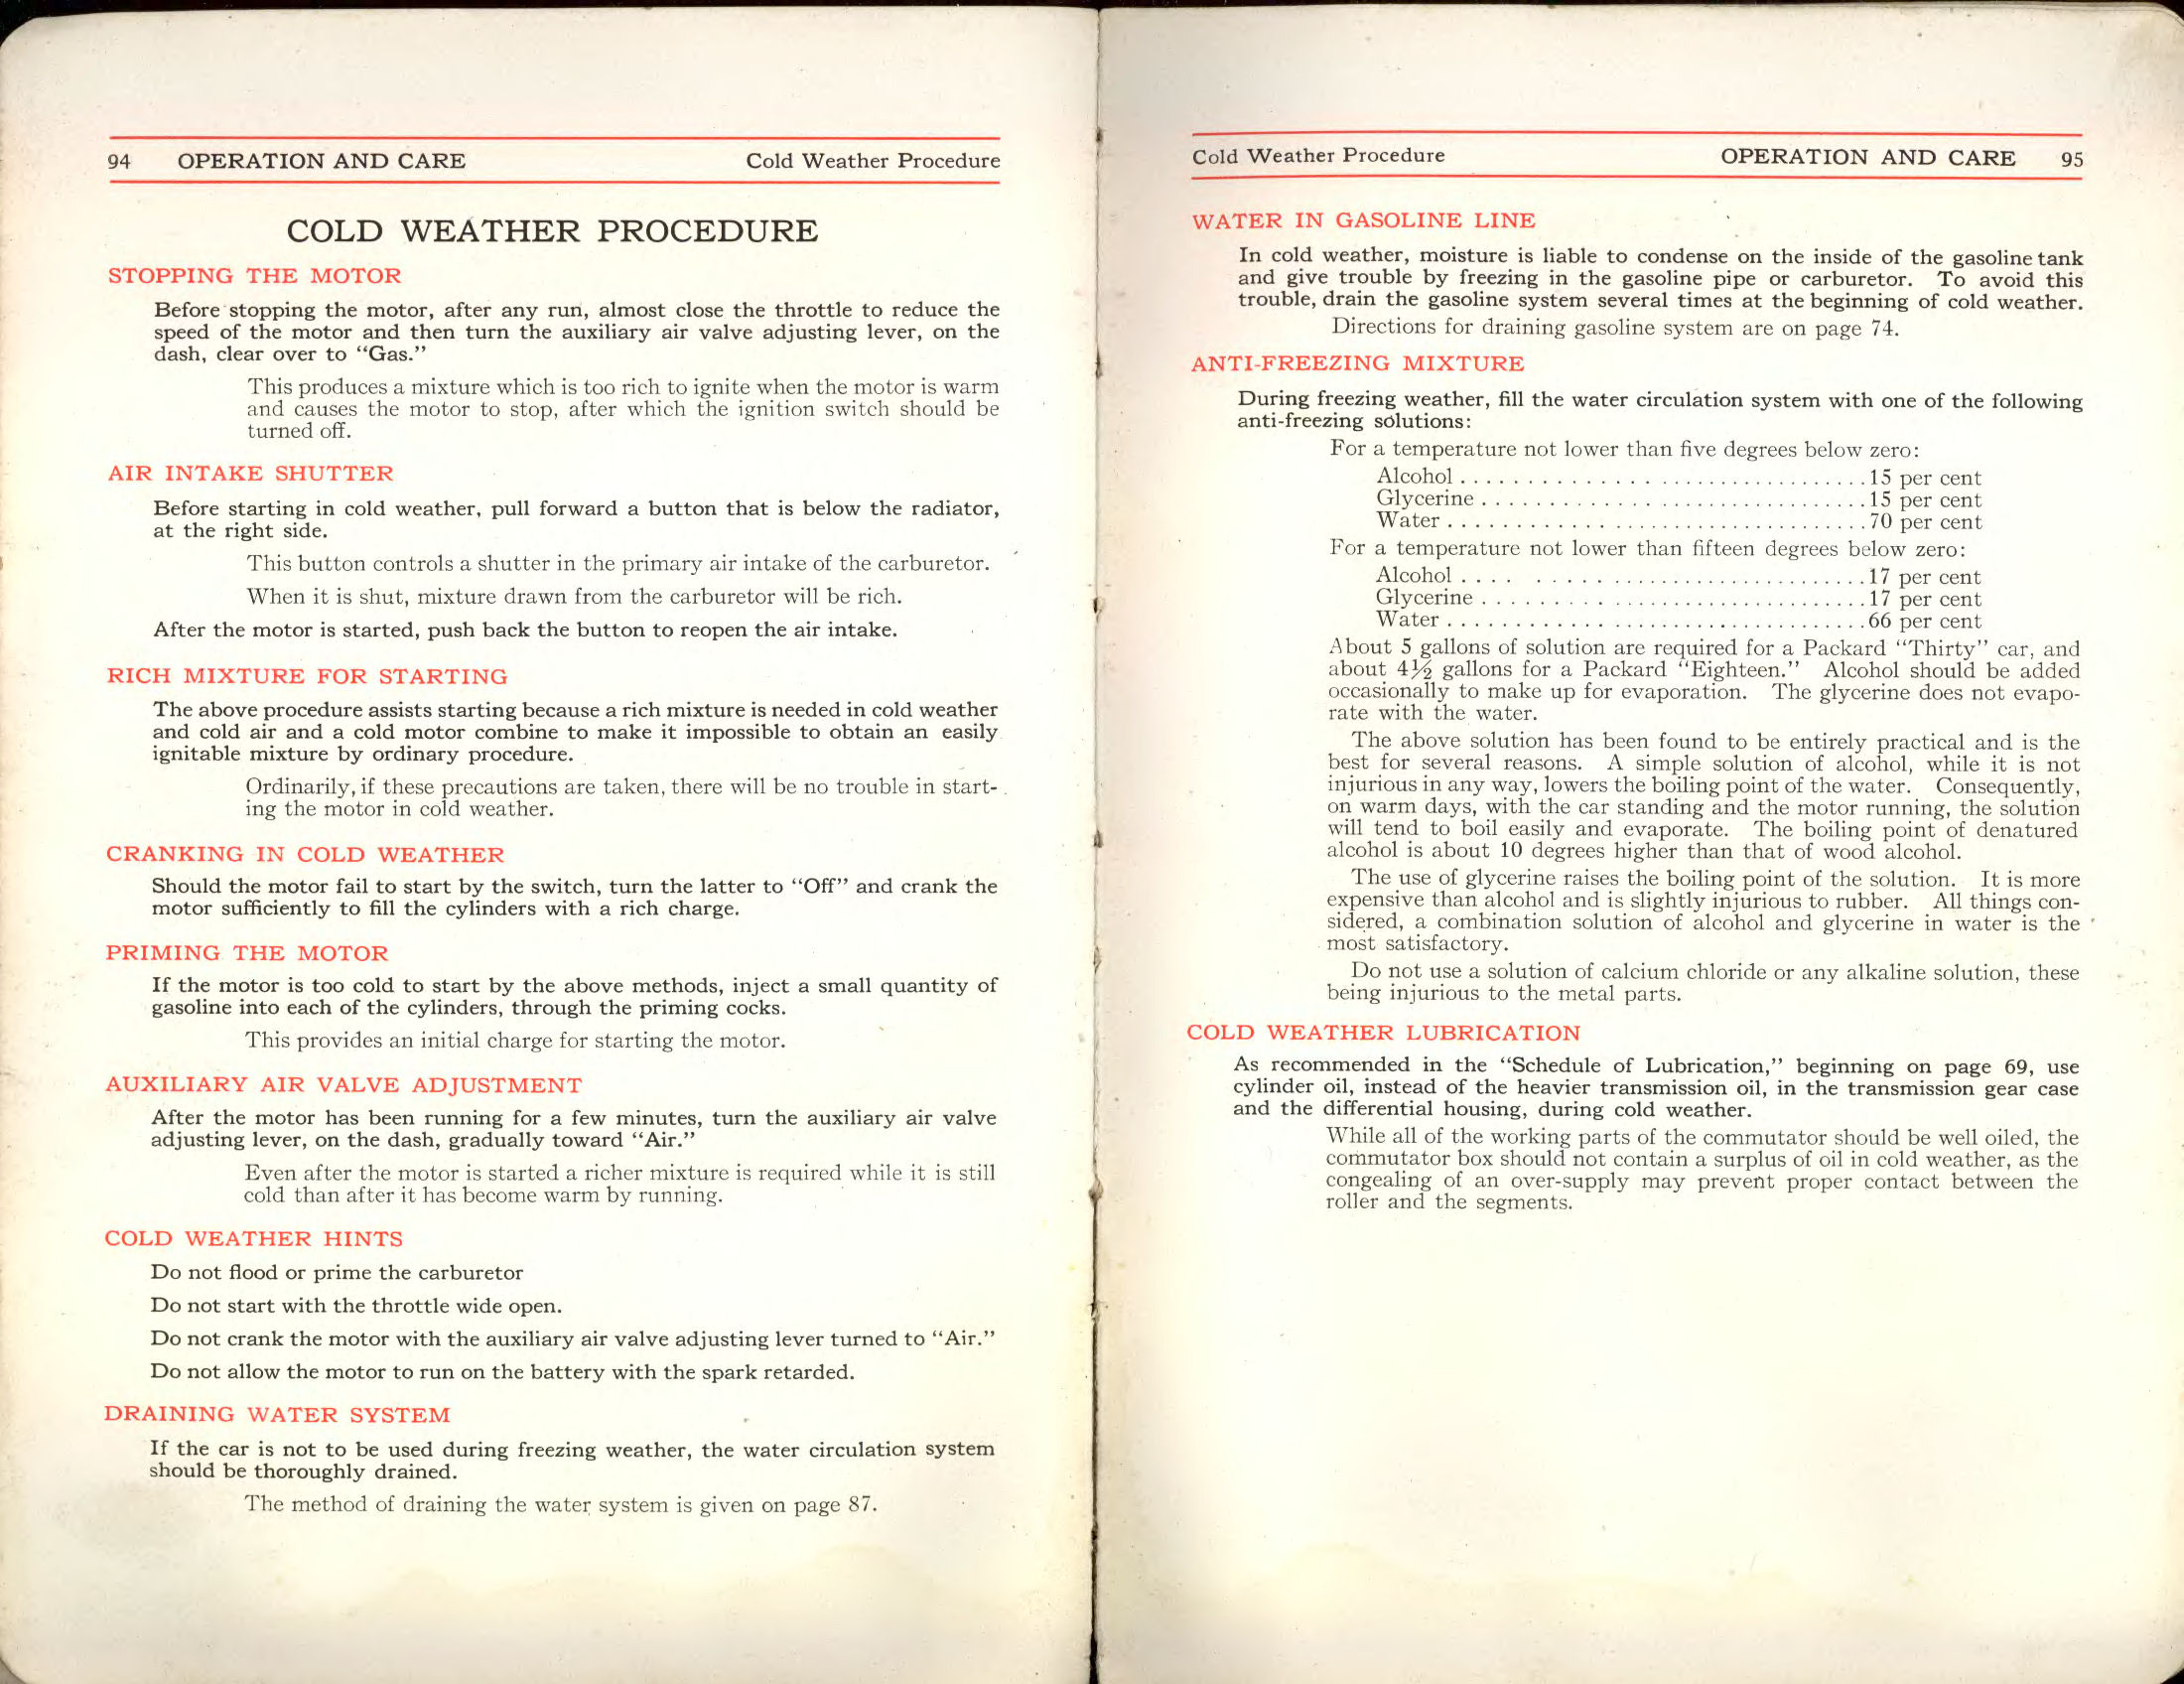 1911 Packard Owners Manual Page 14